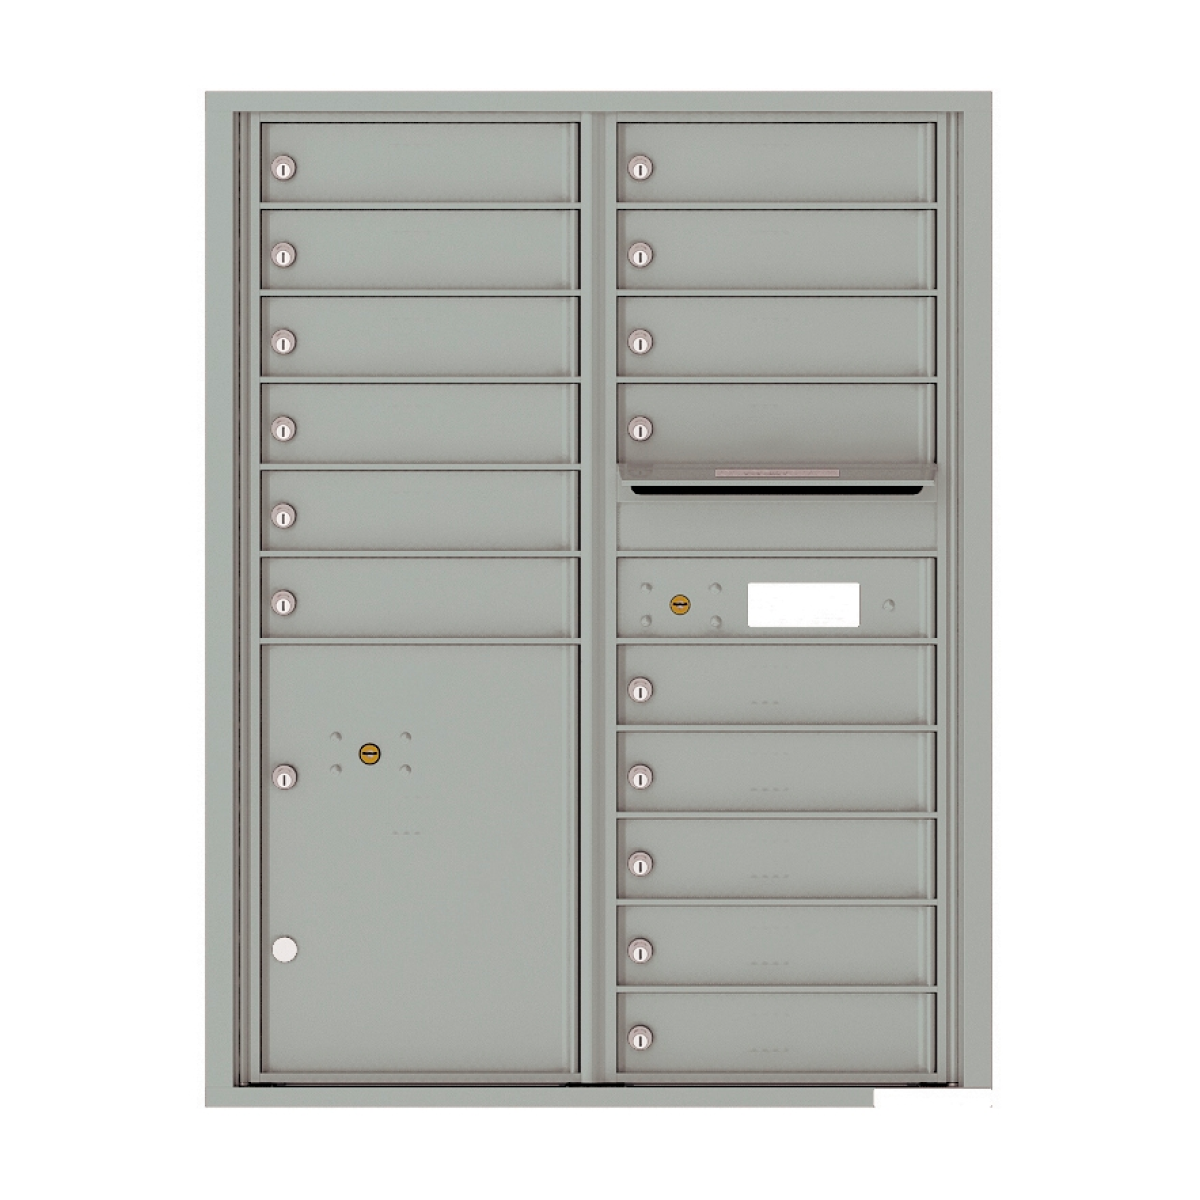 Recessed 4C Horizontal Mailbox – 15 Doors 1 Parcel Lockers – Front Loading – 4C11D-15 – USPS Approved Product Image